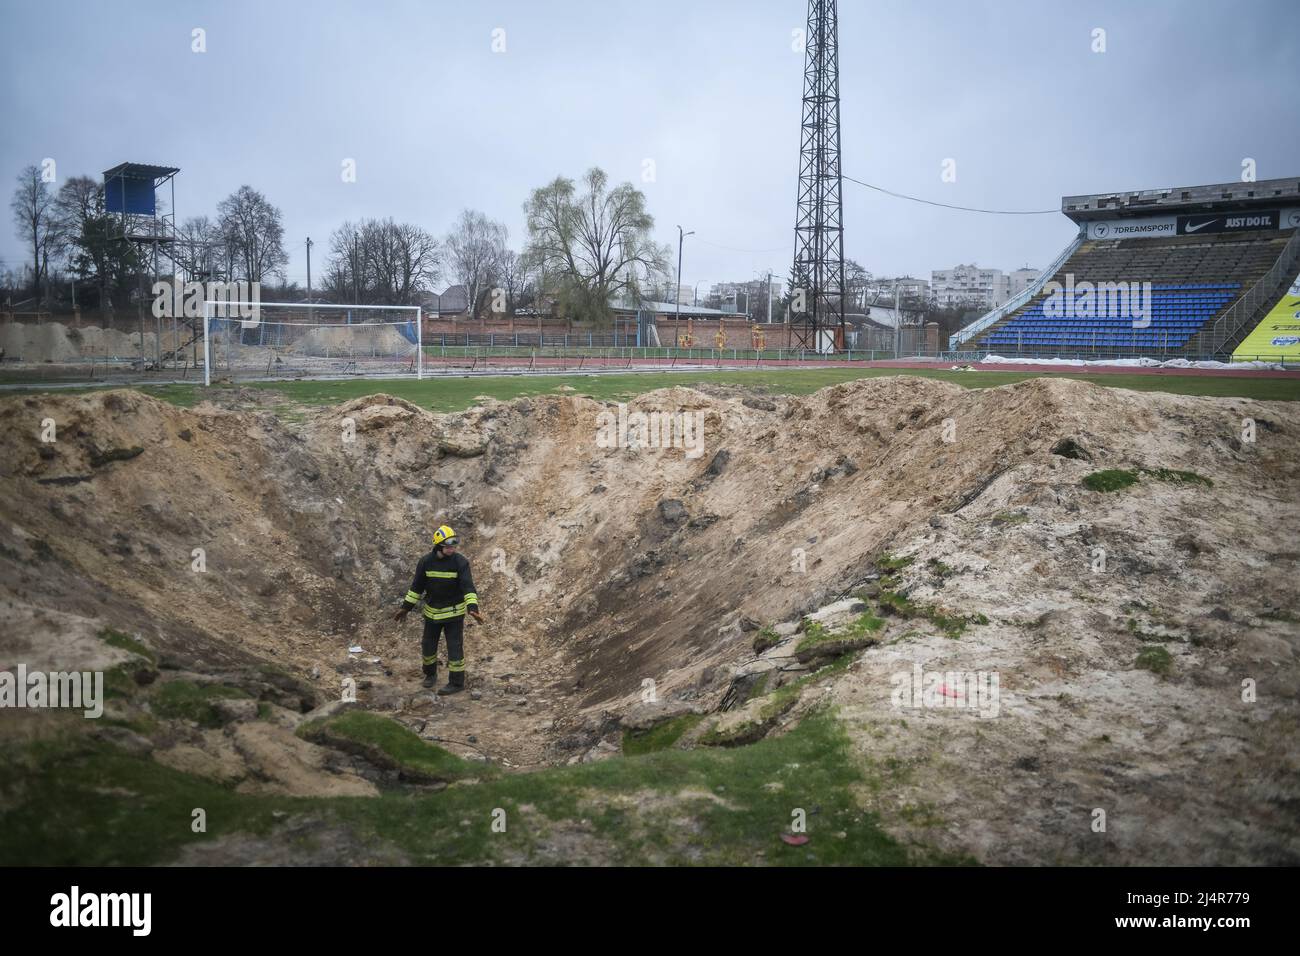 Ukraine. 16th Apr, 2022. A fire fighter inspects a crater in a football pitch at the stadium a residential area of Chernihiv, Ukraine damaged by shelling during the Russian invasion on April 16, 2022. Russian military forces entered Ukraine territory on Feb. 24, 2022. (Photo by Piero Cruciatti/Sipa USA) Credit: Sipa USA/Alamy Live News Stock Photo